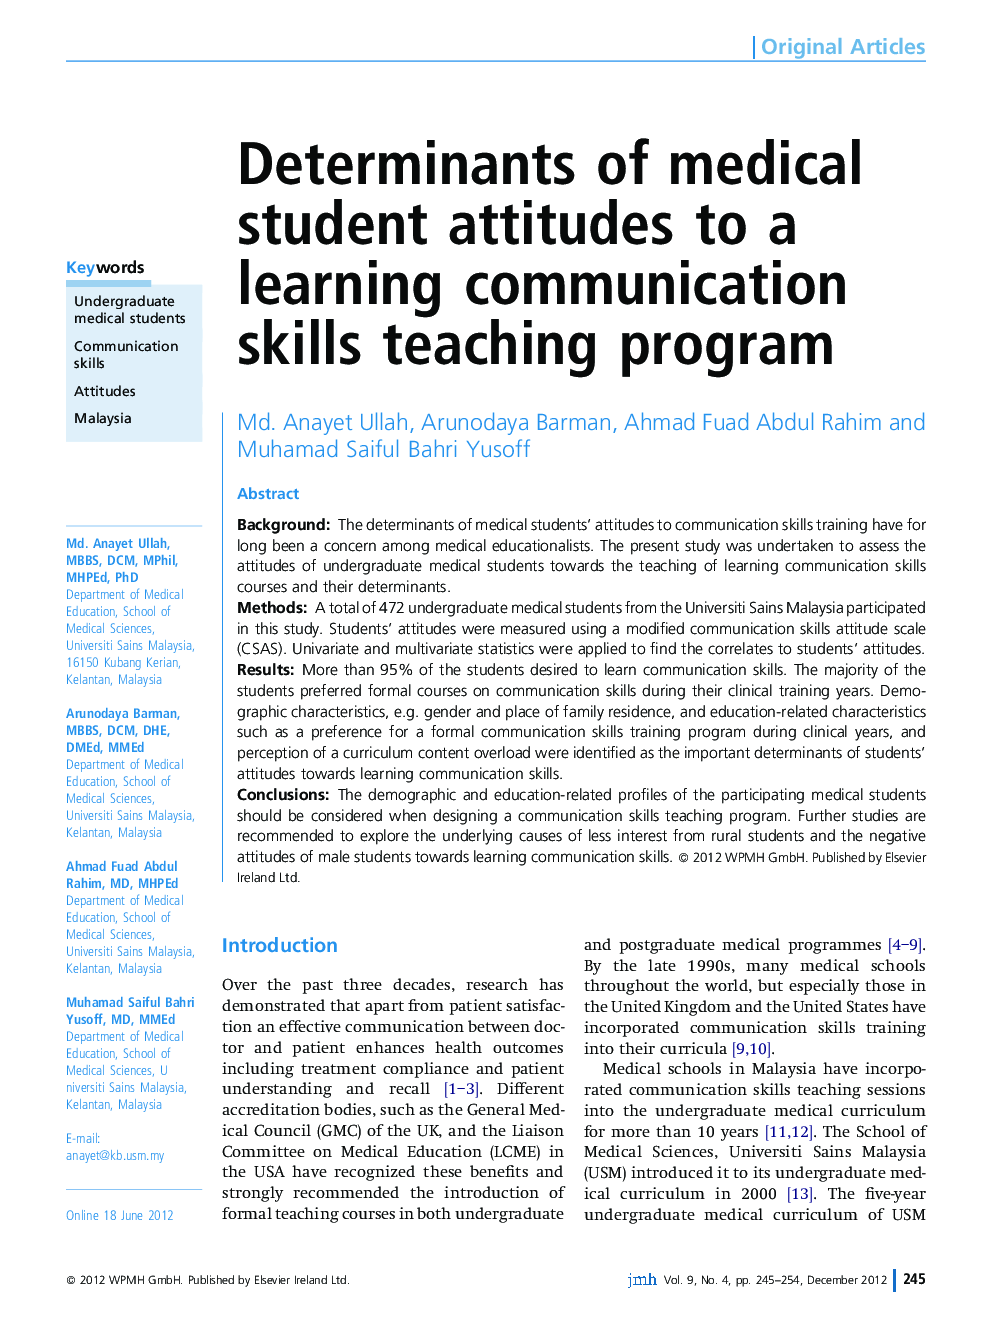 Determinants of medical student attitudes to a learning communication skills teaching program